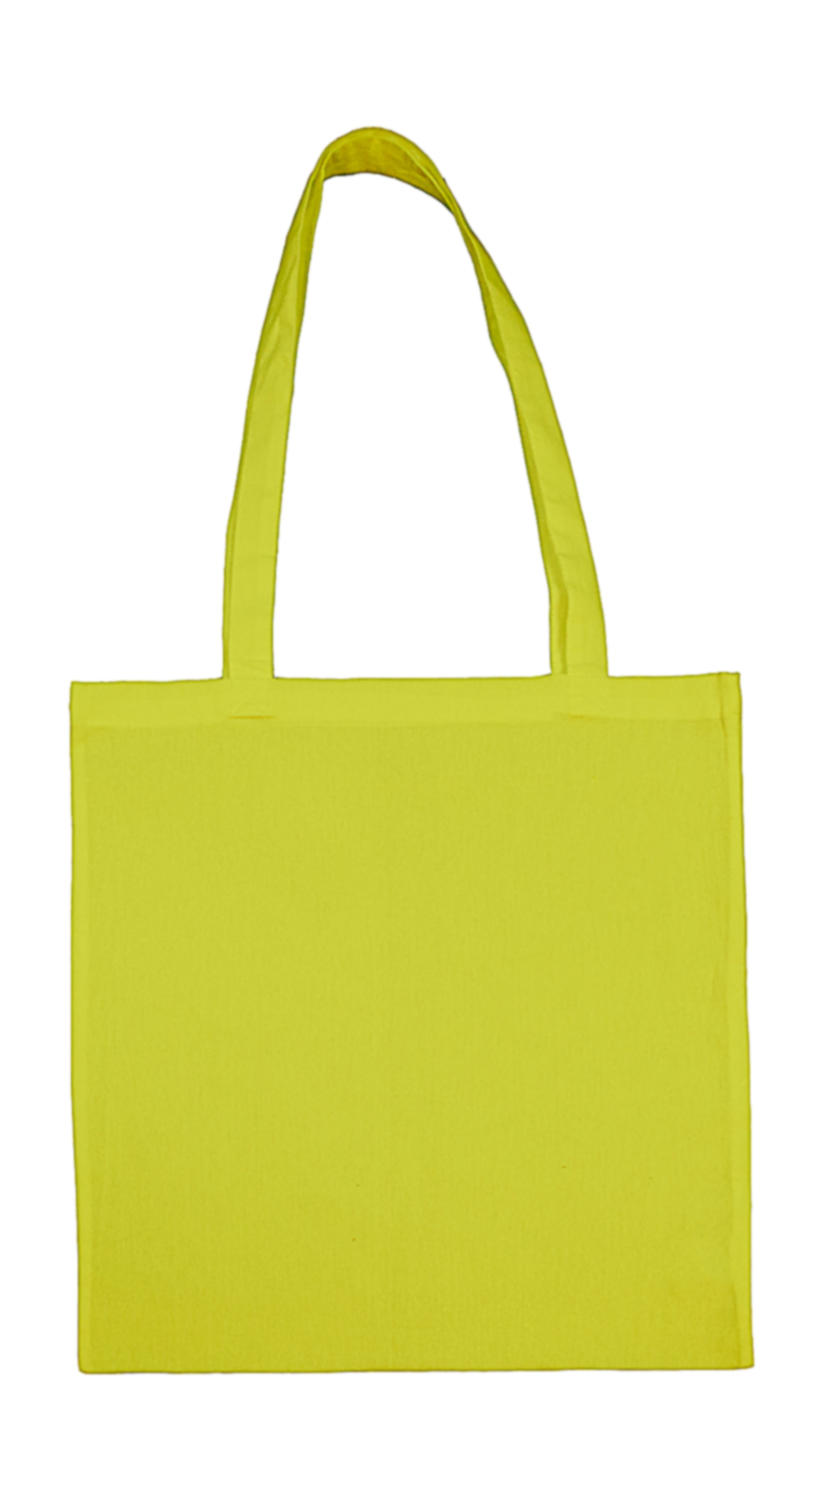  Cotton Bag LH in Farbe Limeade